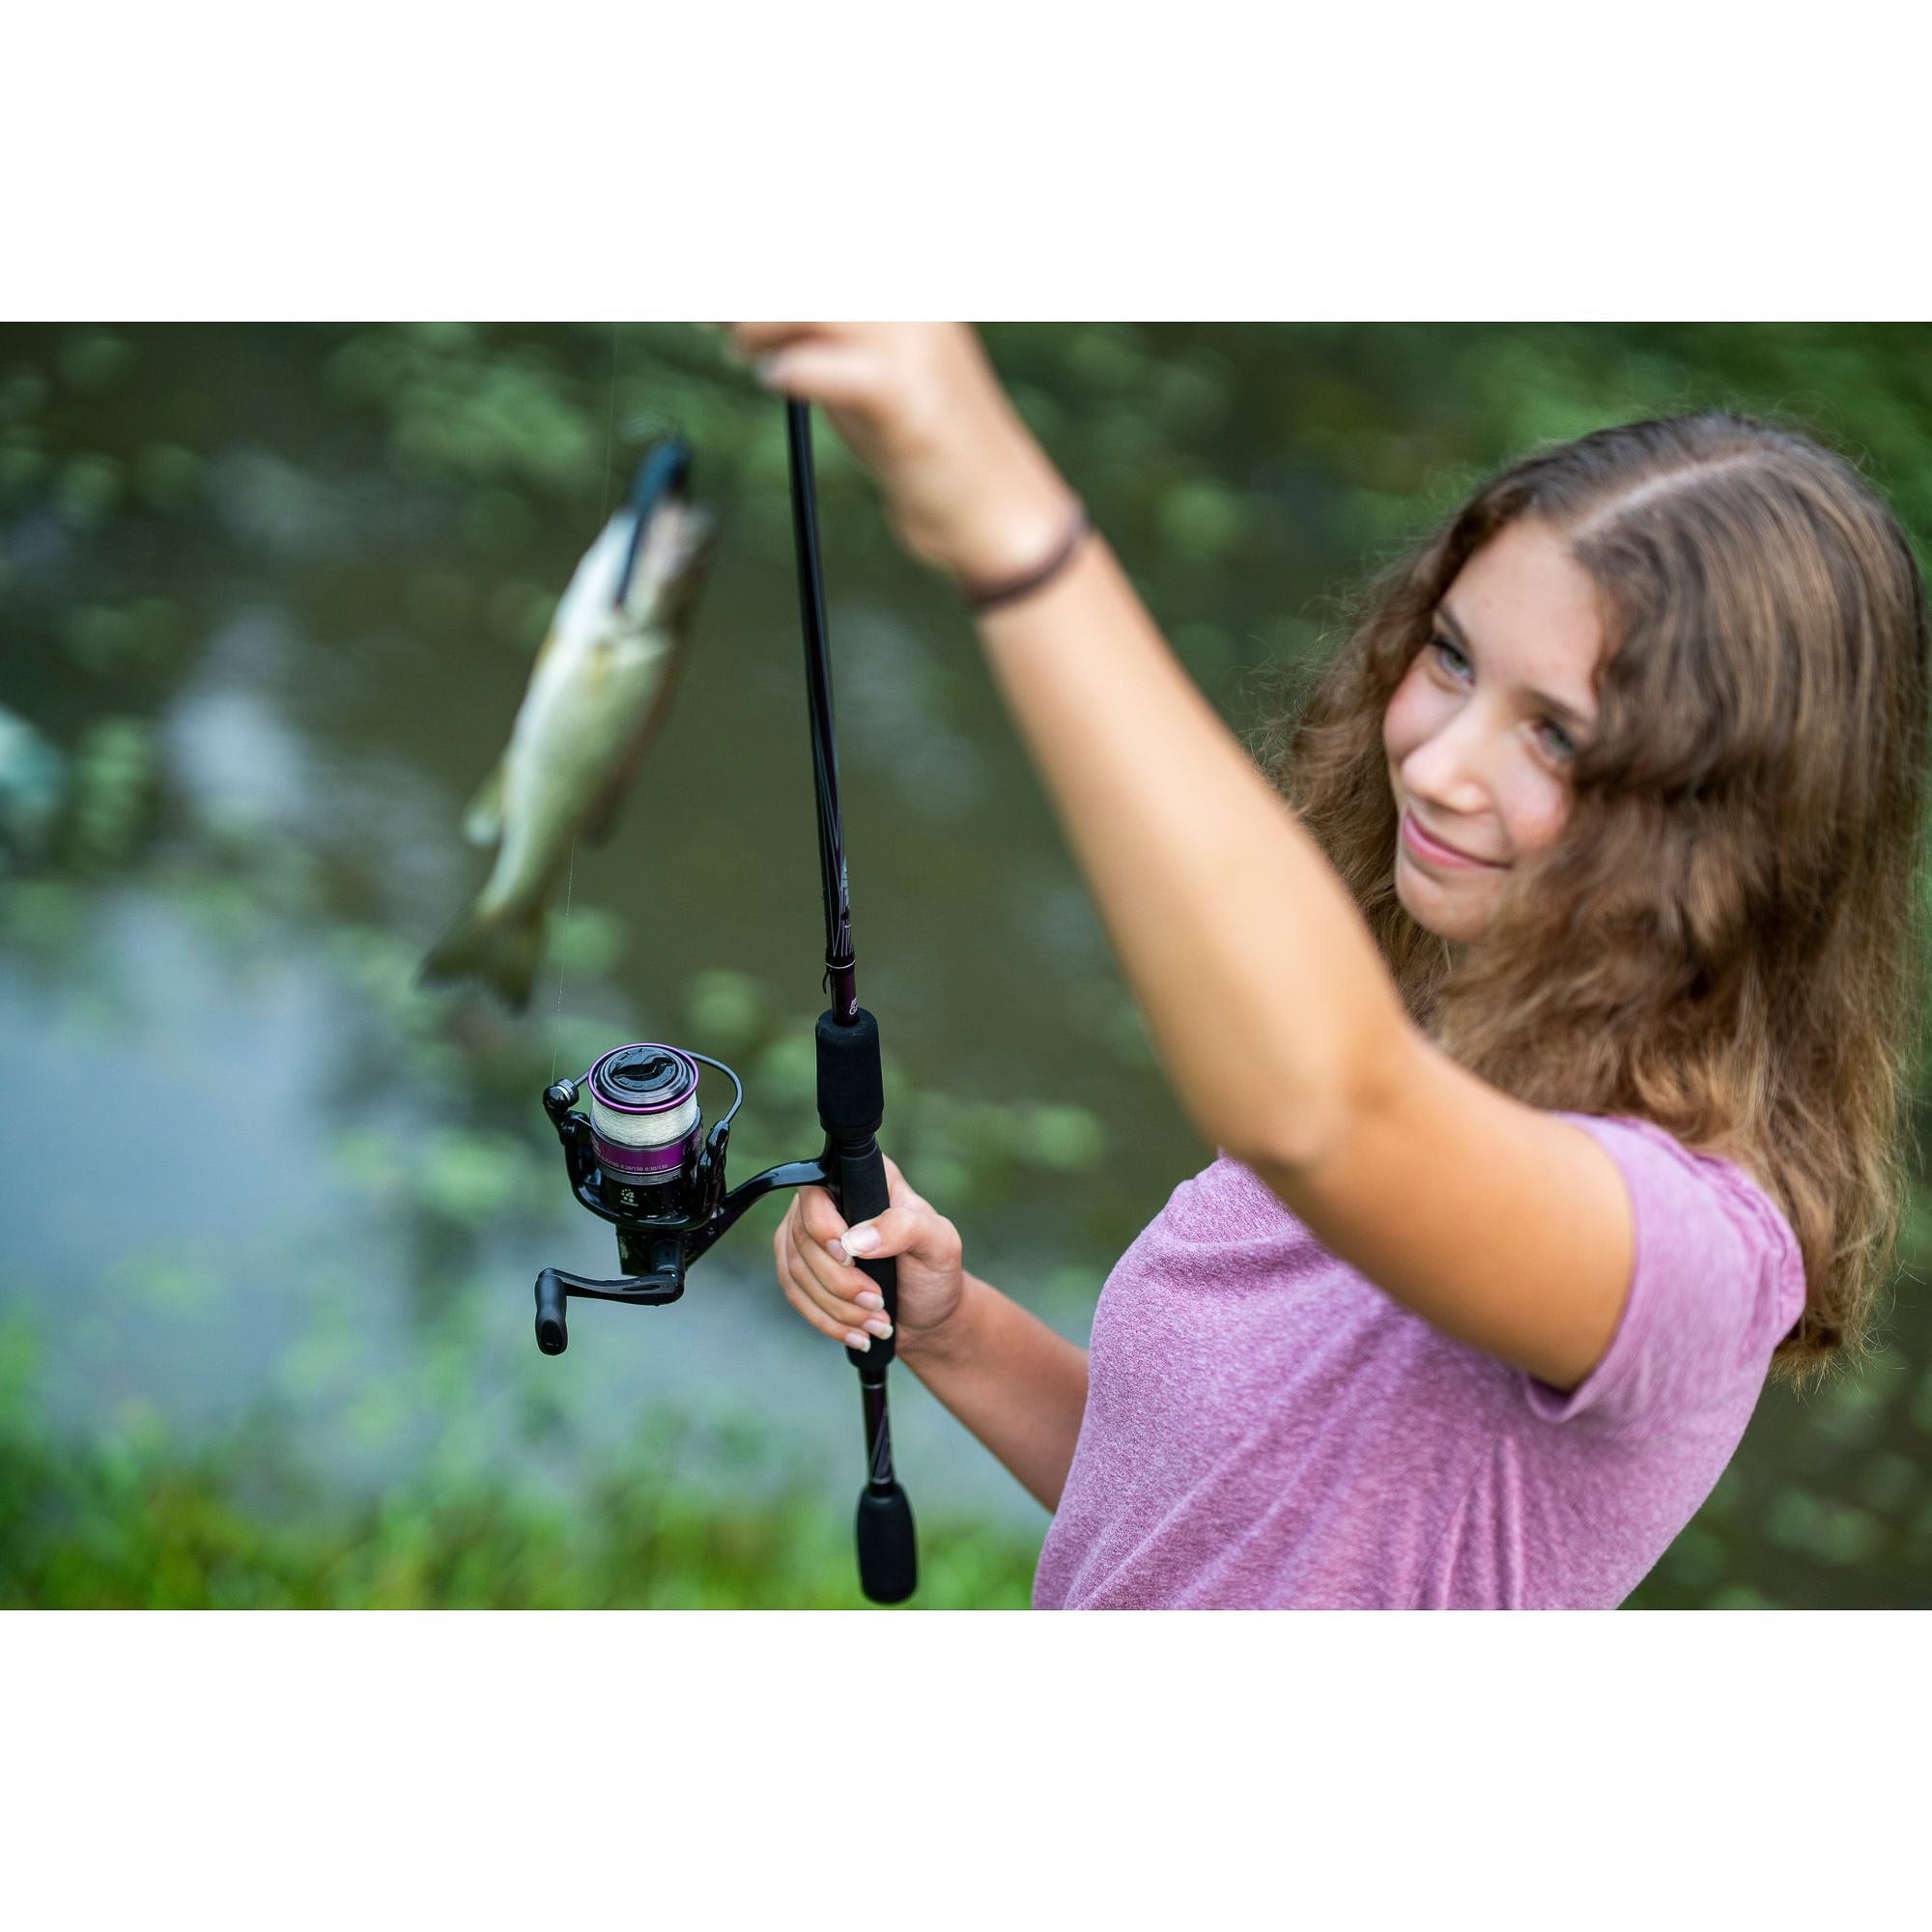 Abu Garcia 6'6” Gen IKE Youth Fishing Rod and Reel Baitcast Combo, 1-Piece  Rod, Size LP Reel, Right Hand Position, Fishing Rod and Reel for Kids